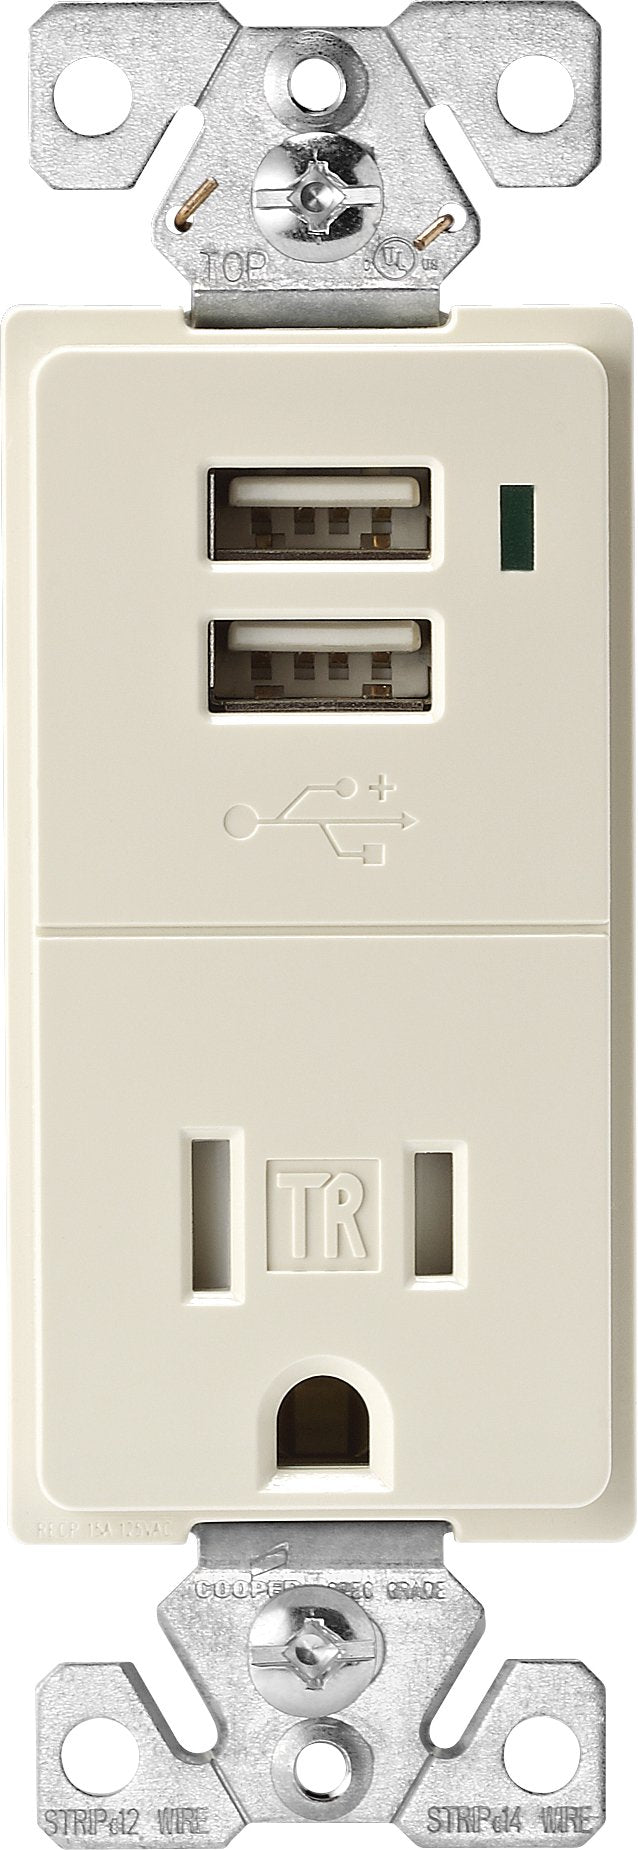 EATON TR7740LA-BOX Combination USB Charger with Tamper Resistant 15A 125V Receptacle, Light Almond